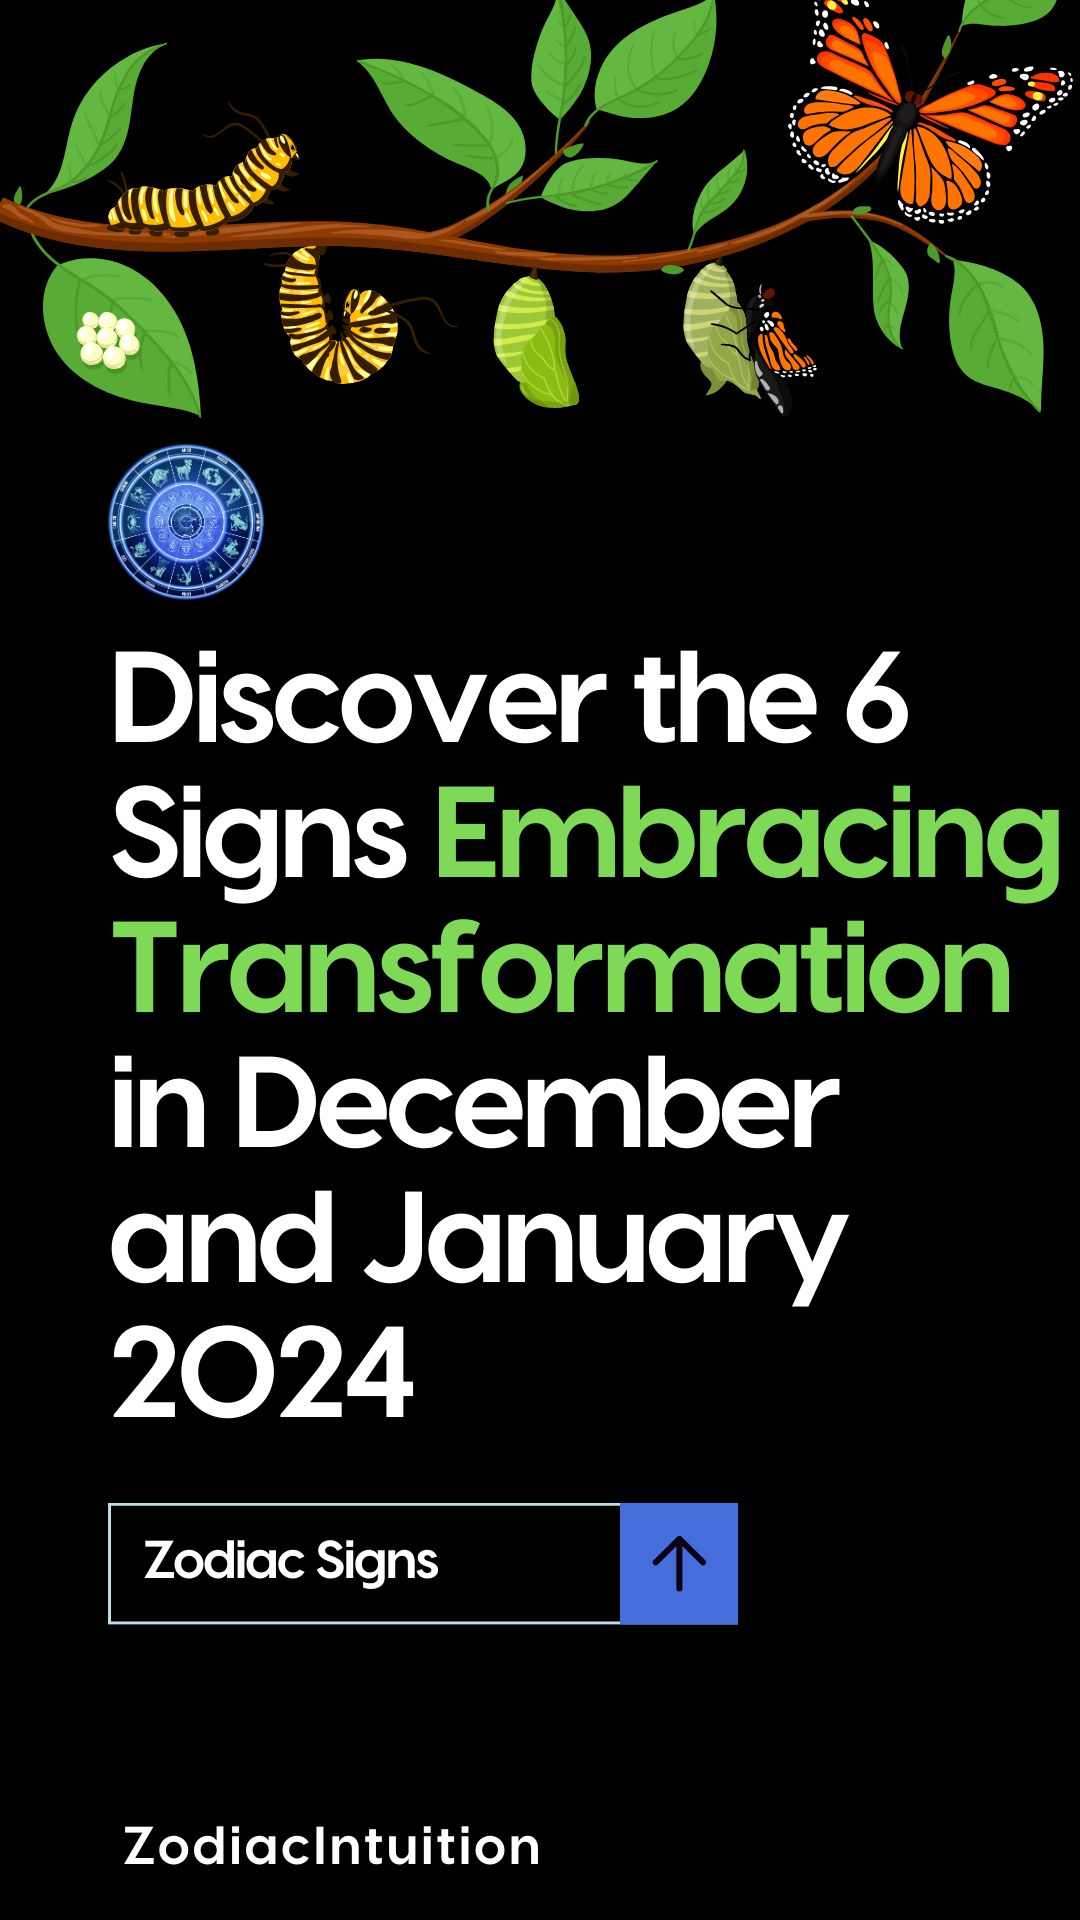 Discover the 6 Signs Embracing Transformation in December and January 2024